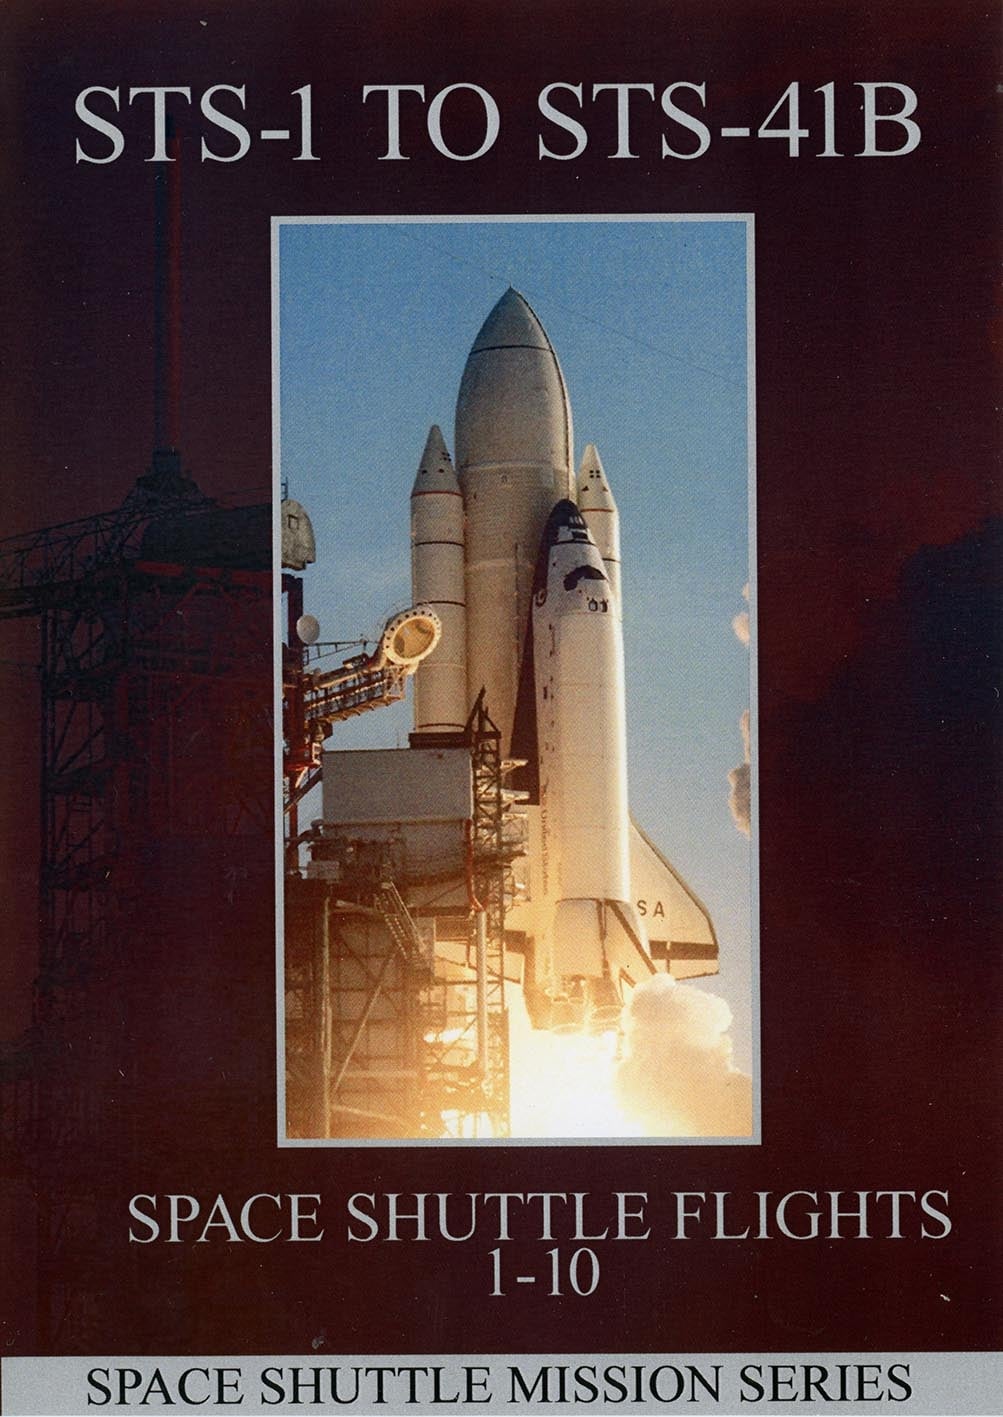 STS-1 to STS-41B: Space Shuttle Flight 1-10